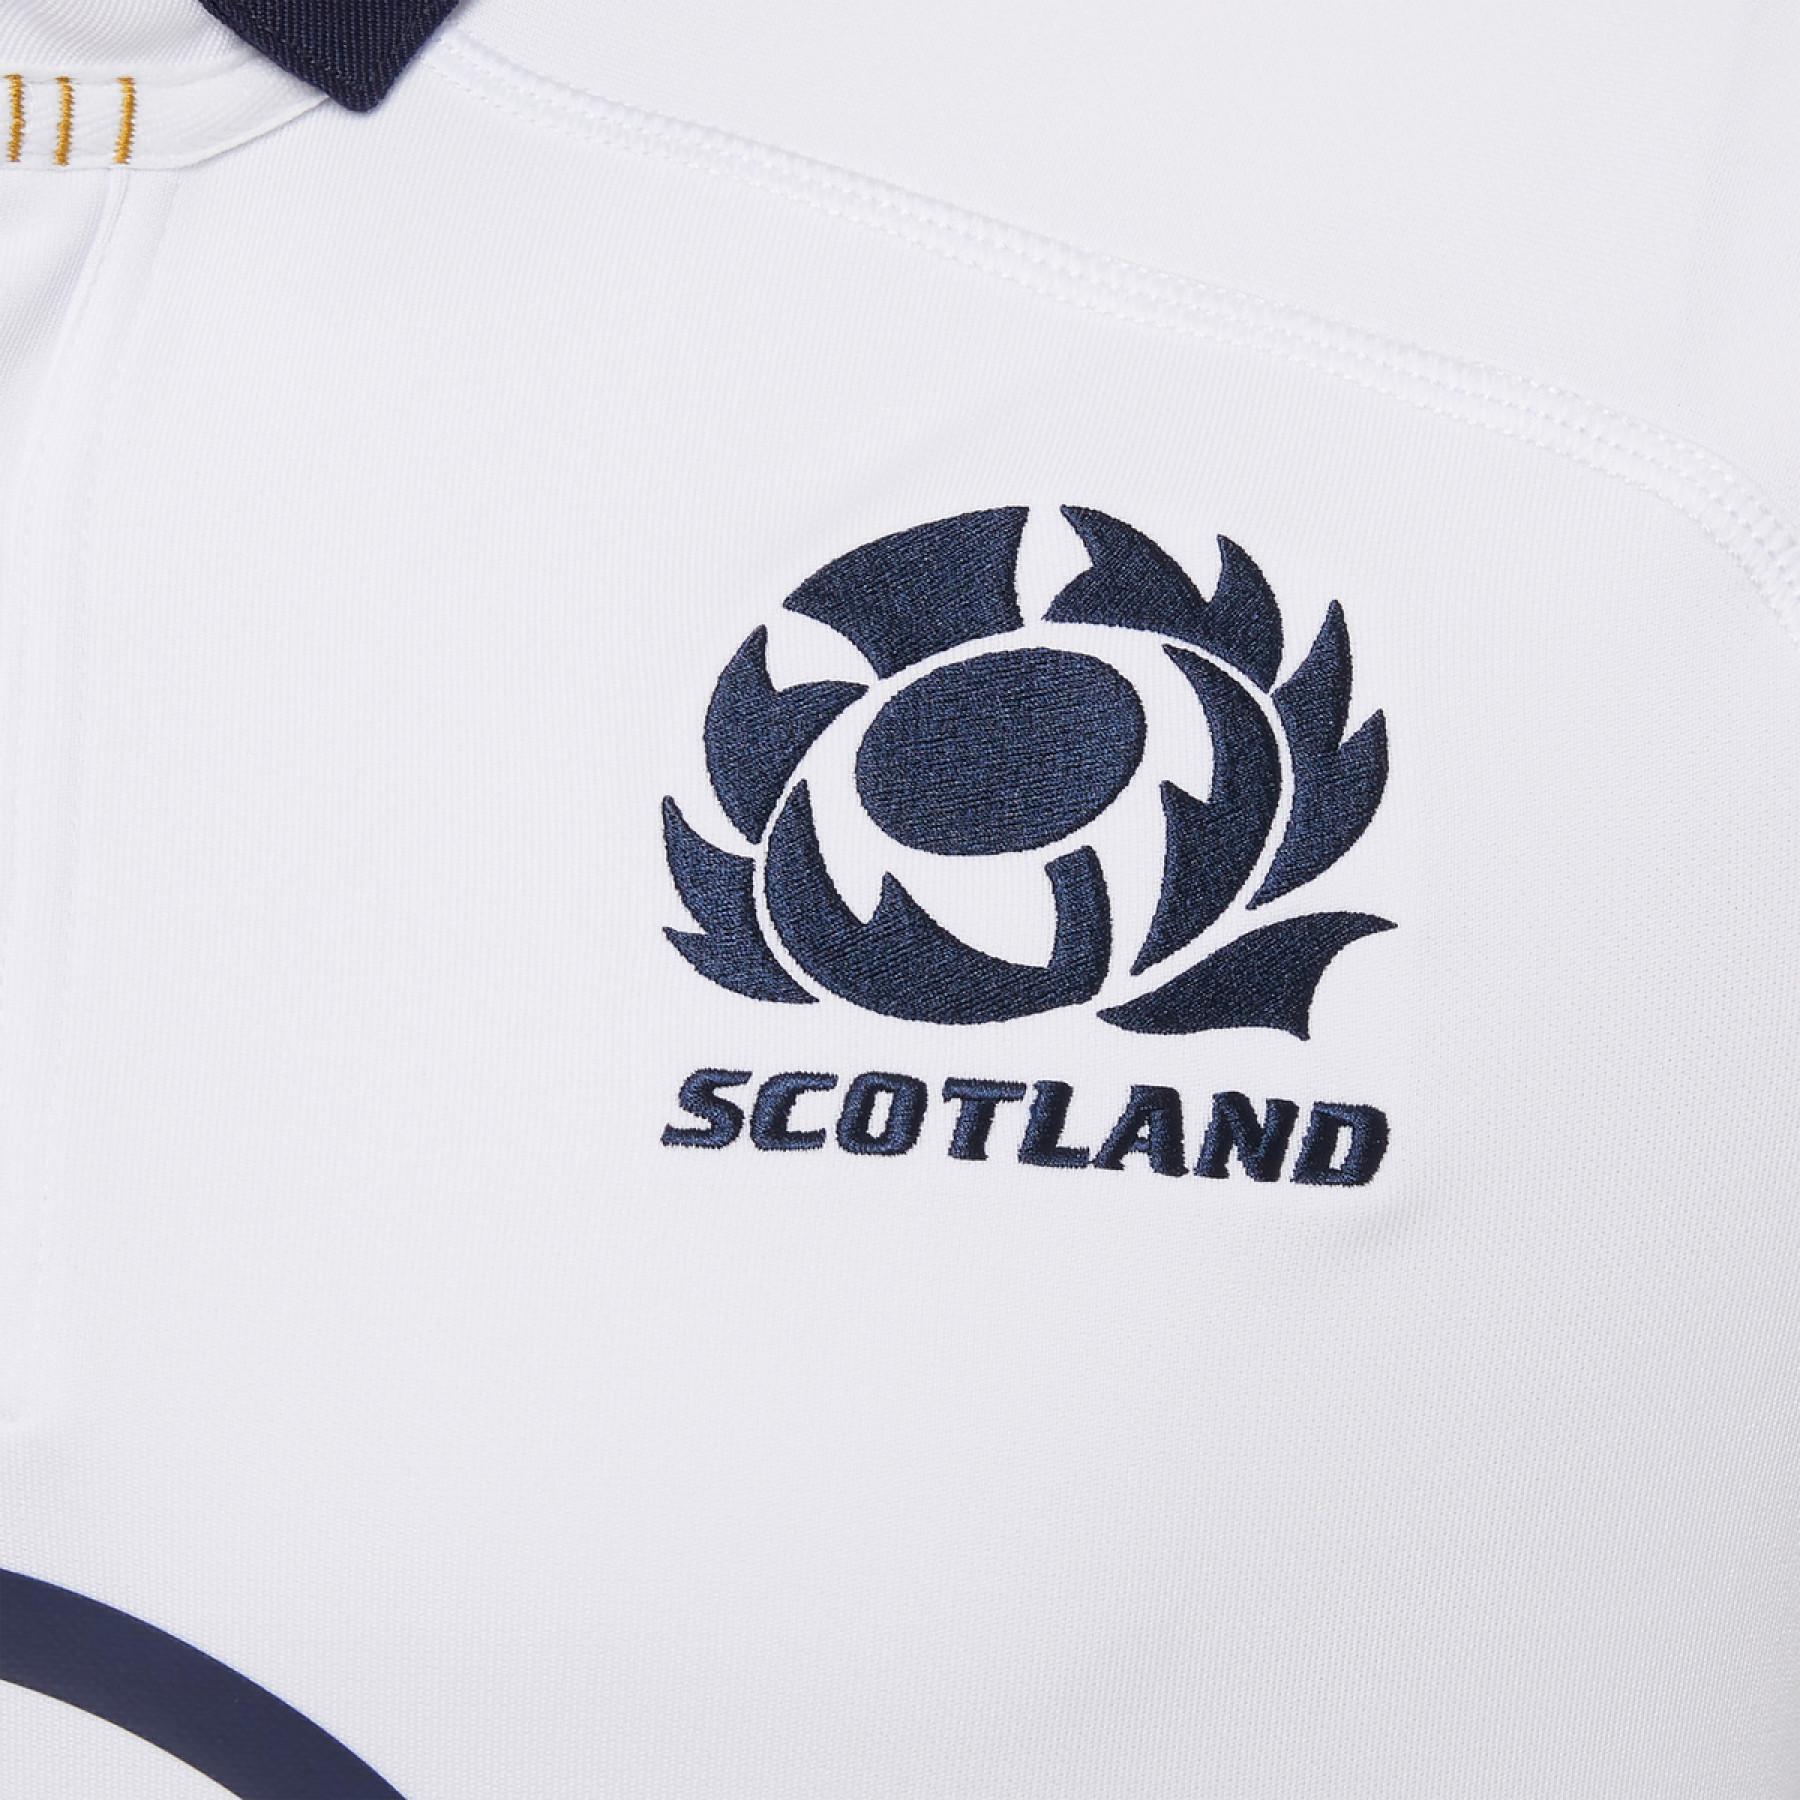 Scotland rugby outdoor jersey 2020/21